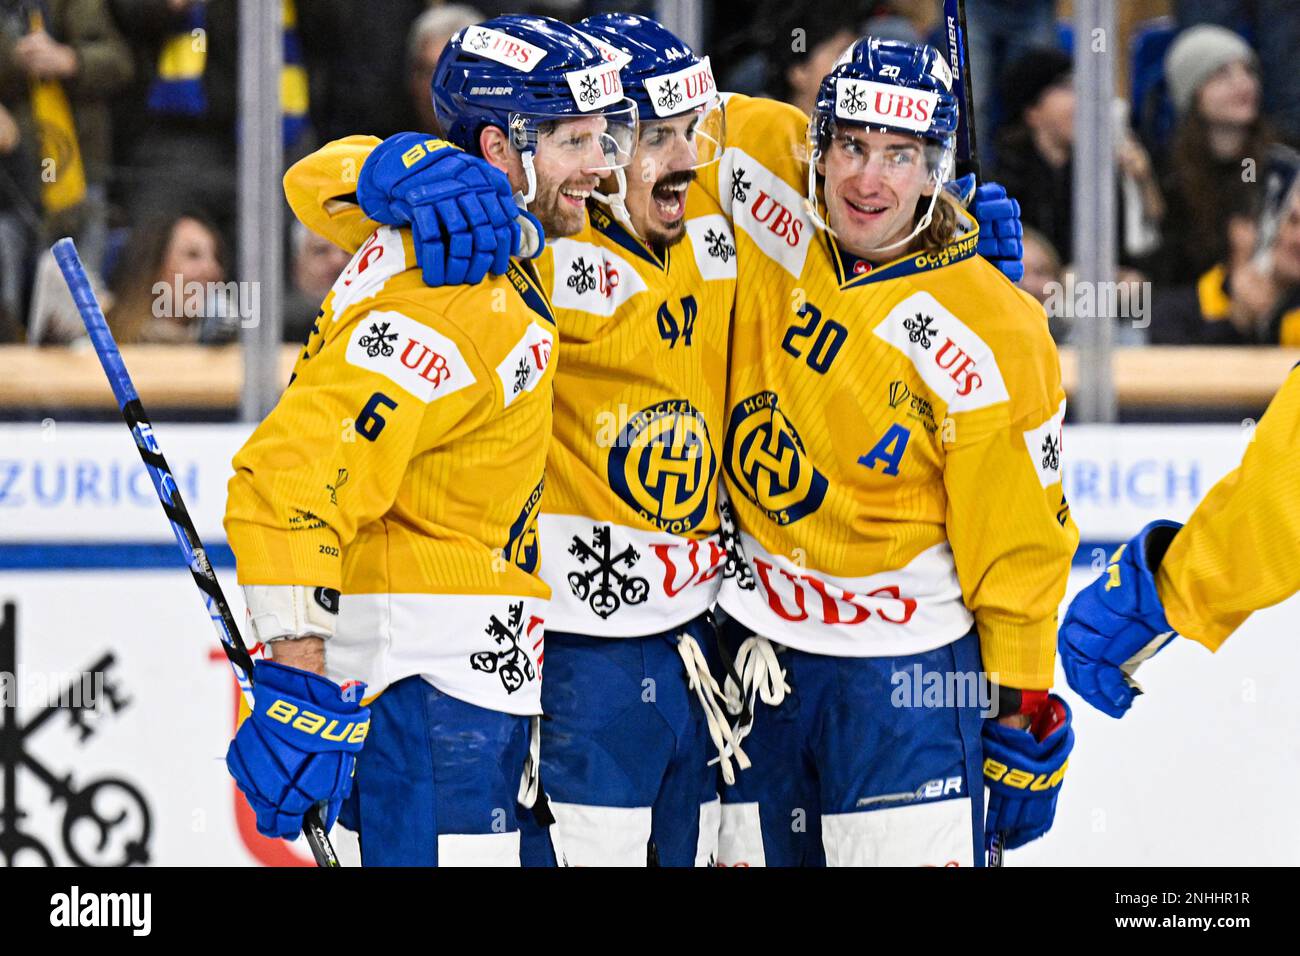 From left, Davos Klas Dahlbeck, Matej Stransky and Michael Fora celebrate scoring during the 94th Spengler Cup ice hockey match between Czech Republics HC Sparta Praha and Switzerlands HC Davos, in Davos,